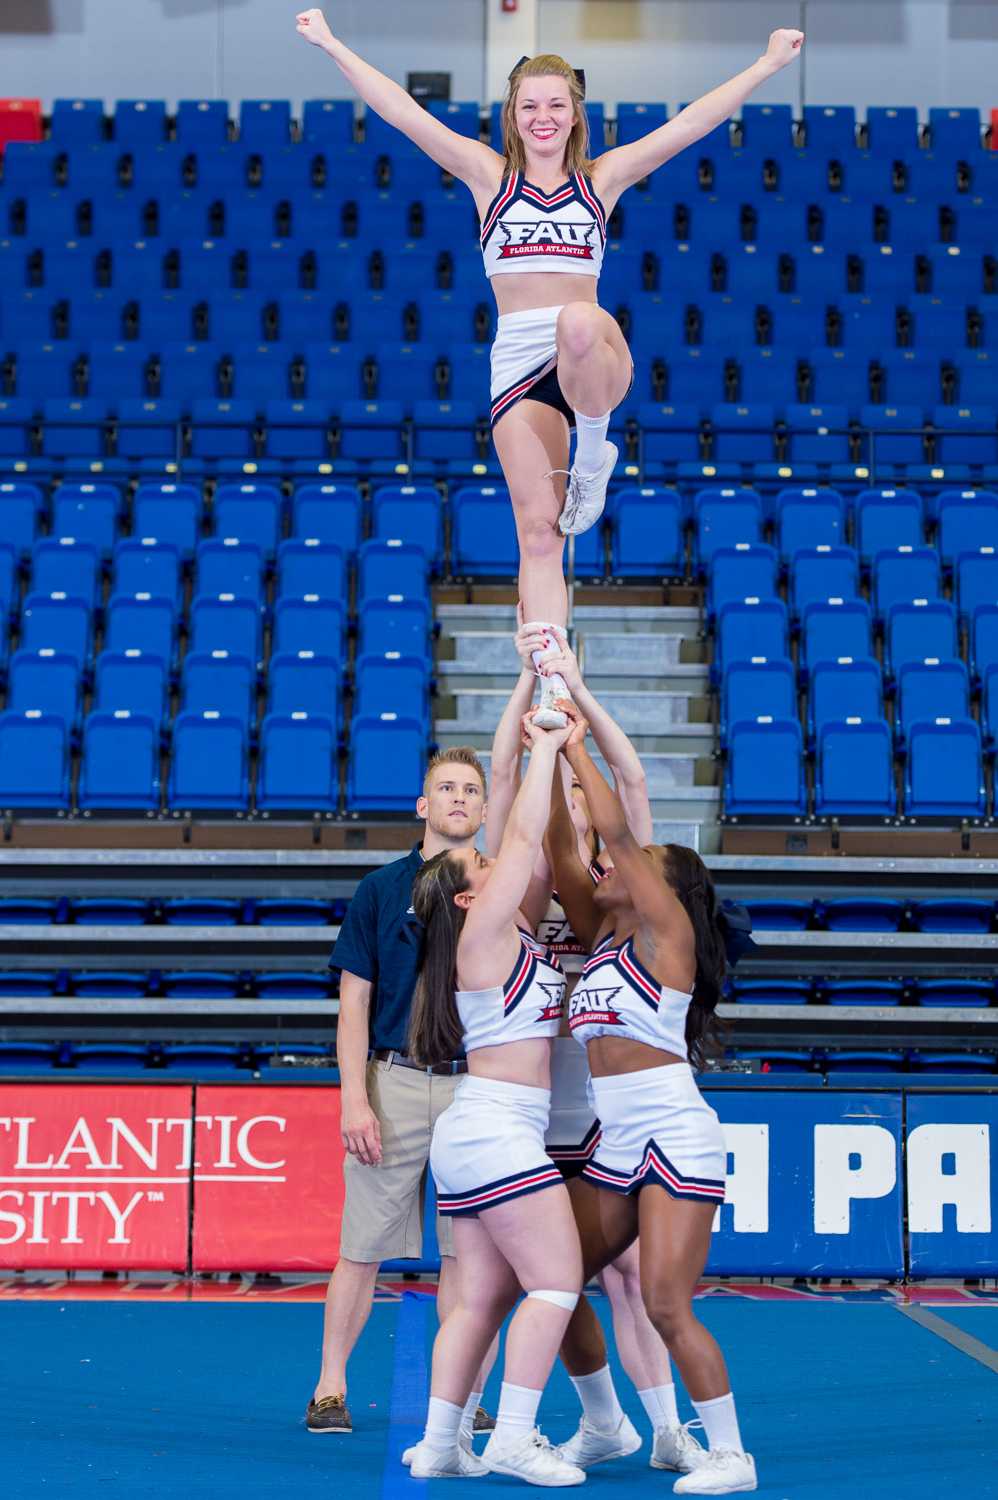 FAU Cheerleaders Marisa Paglino (left), Amanda Johnson (back),  Colette Bienvenu( right) and Kelsey Miller (top) pull a Liberty at the 2015 FAU Dance Team Showcase in The Burrow.  